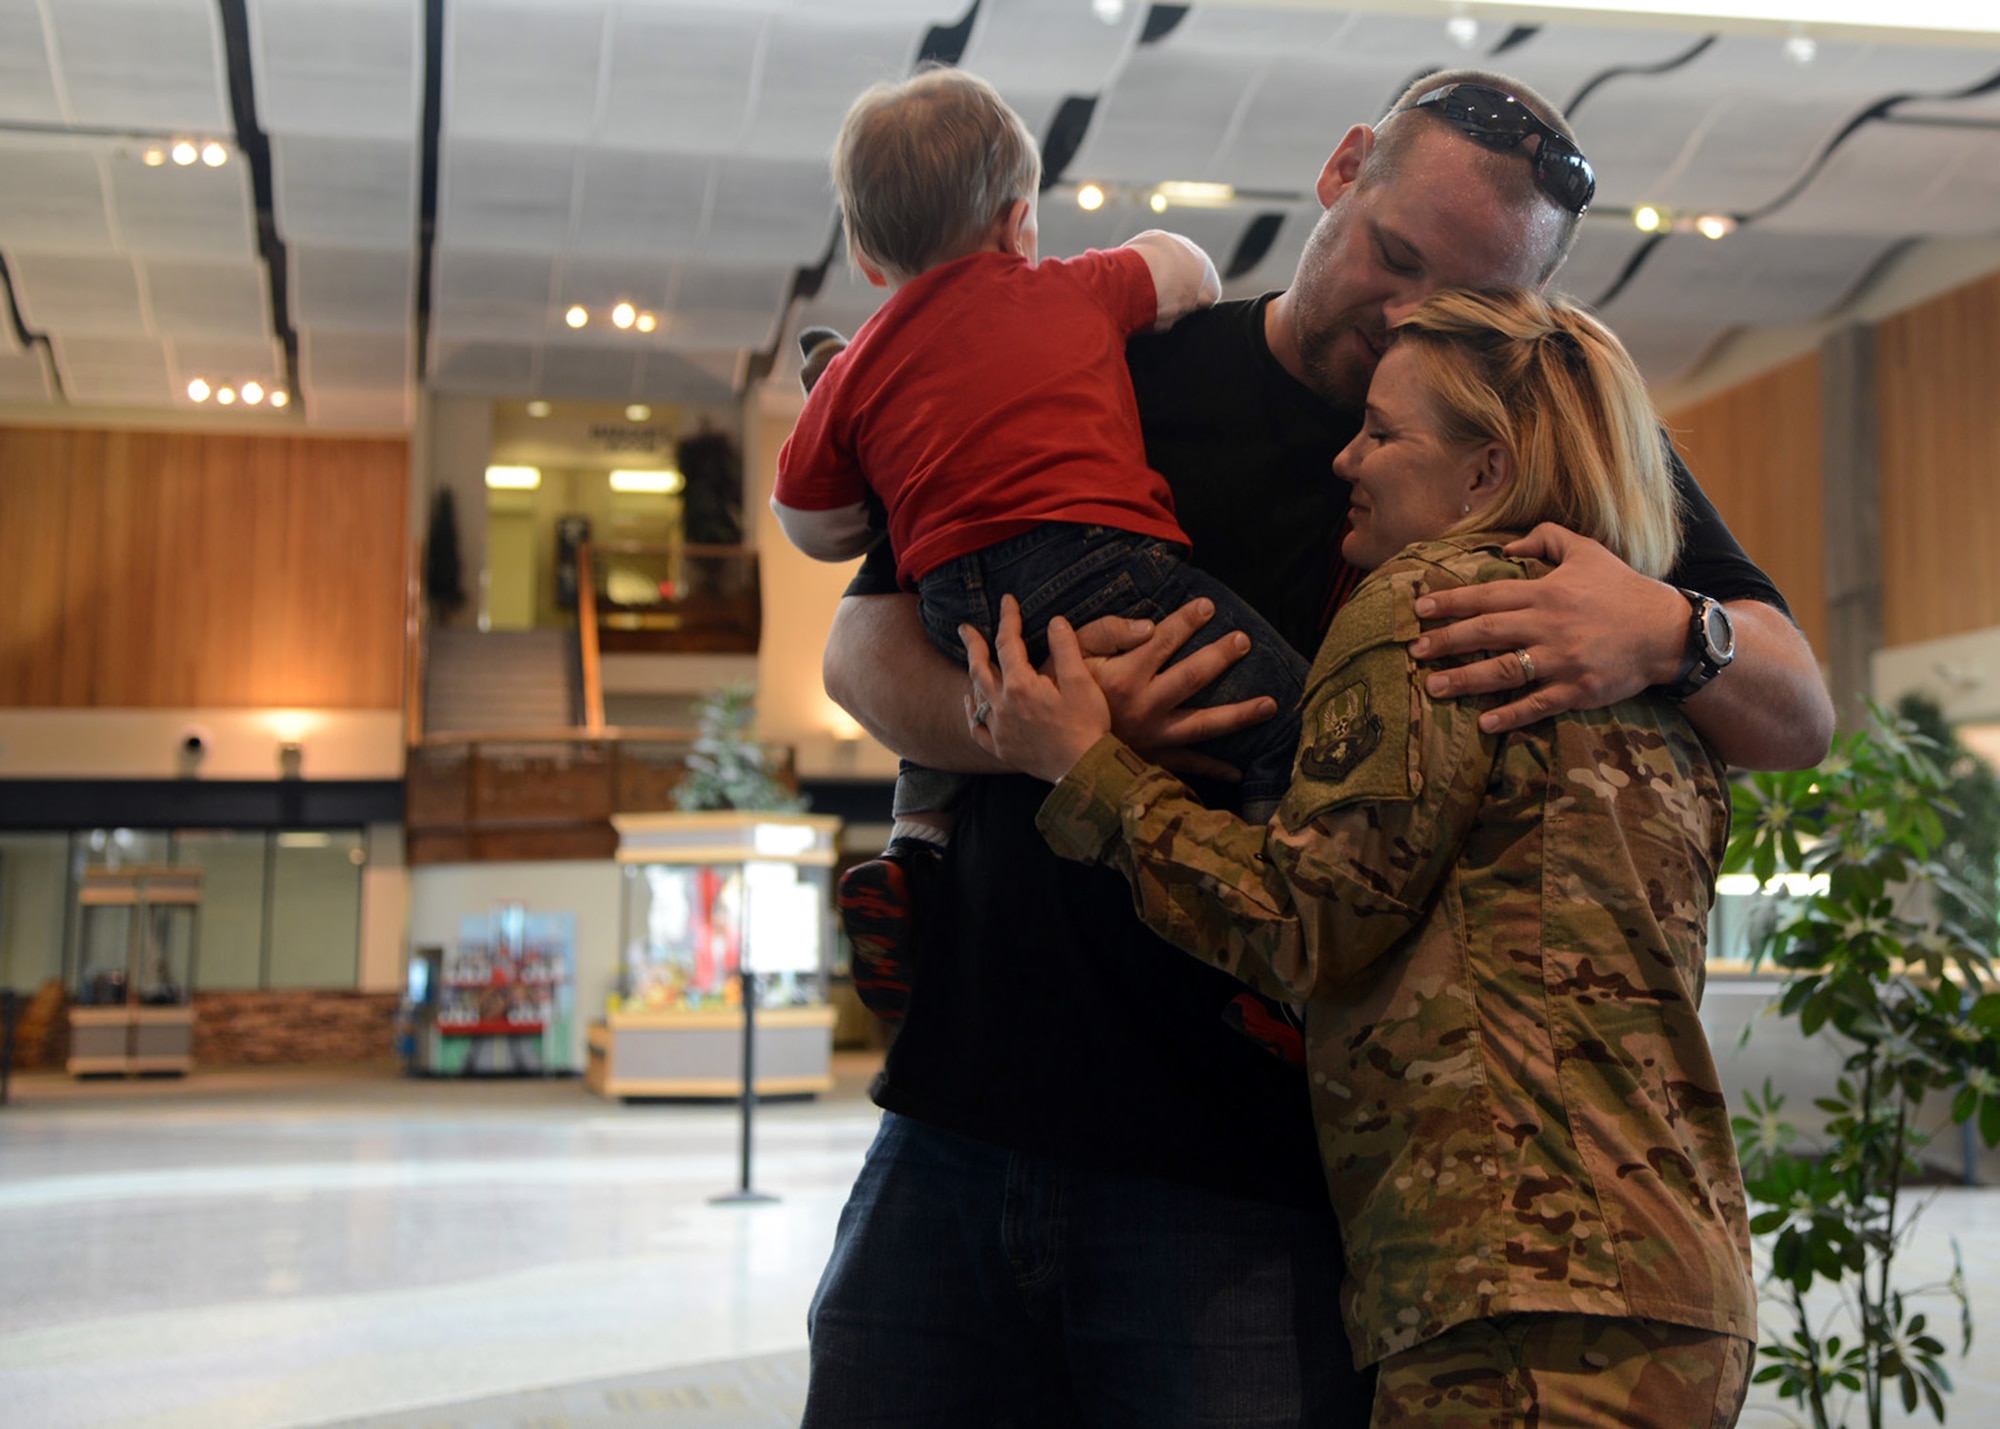 U.S. Air Force 2nd Lt. Nichole Evenson, 315th Training Squadron, Goodfellow Air Force Base greets her family after returning from a deployment at Malmstrom Air Force Base, Mont., Jan. 28, 2016. Air Force Global Strike Command is dedicating 2017 to Airmen, their loved ones and the total force at large and will focus on areas that greatly affect their quality of life. These areas include where they live, learn, play, pray and receive care. (U.S. Air Force photo/Staff Sgt. Delia Marchick)